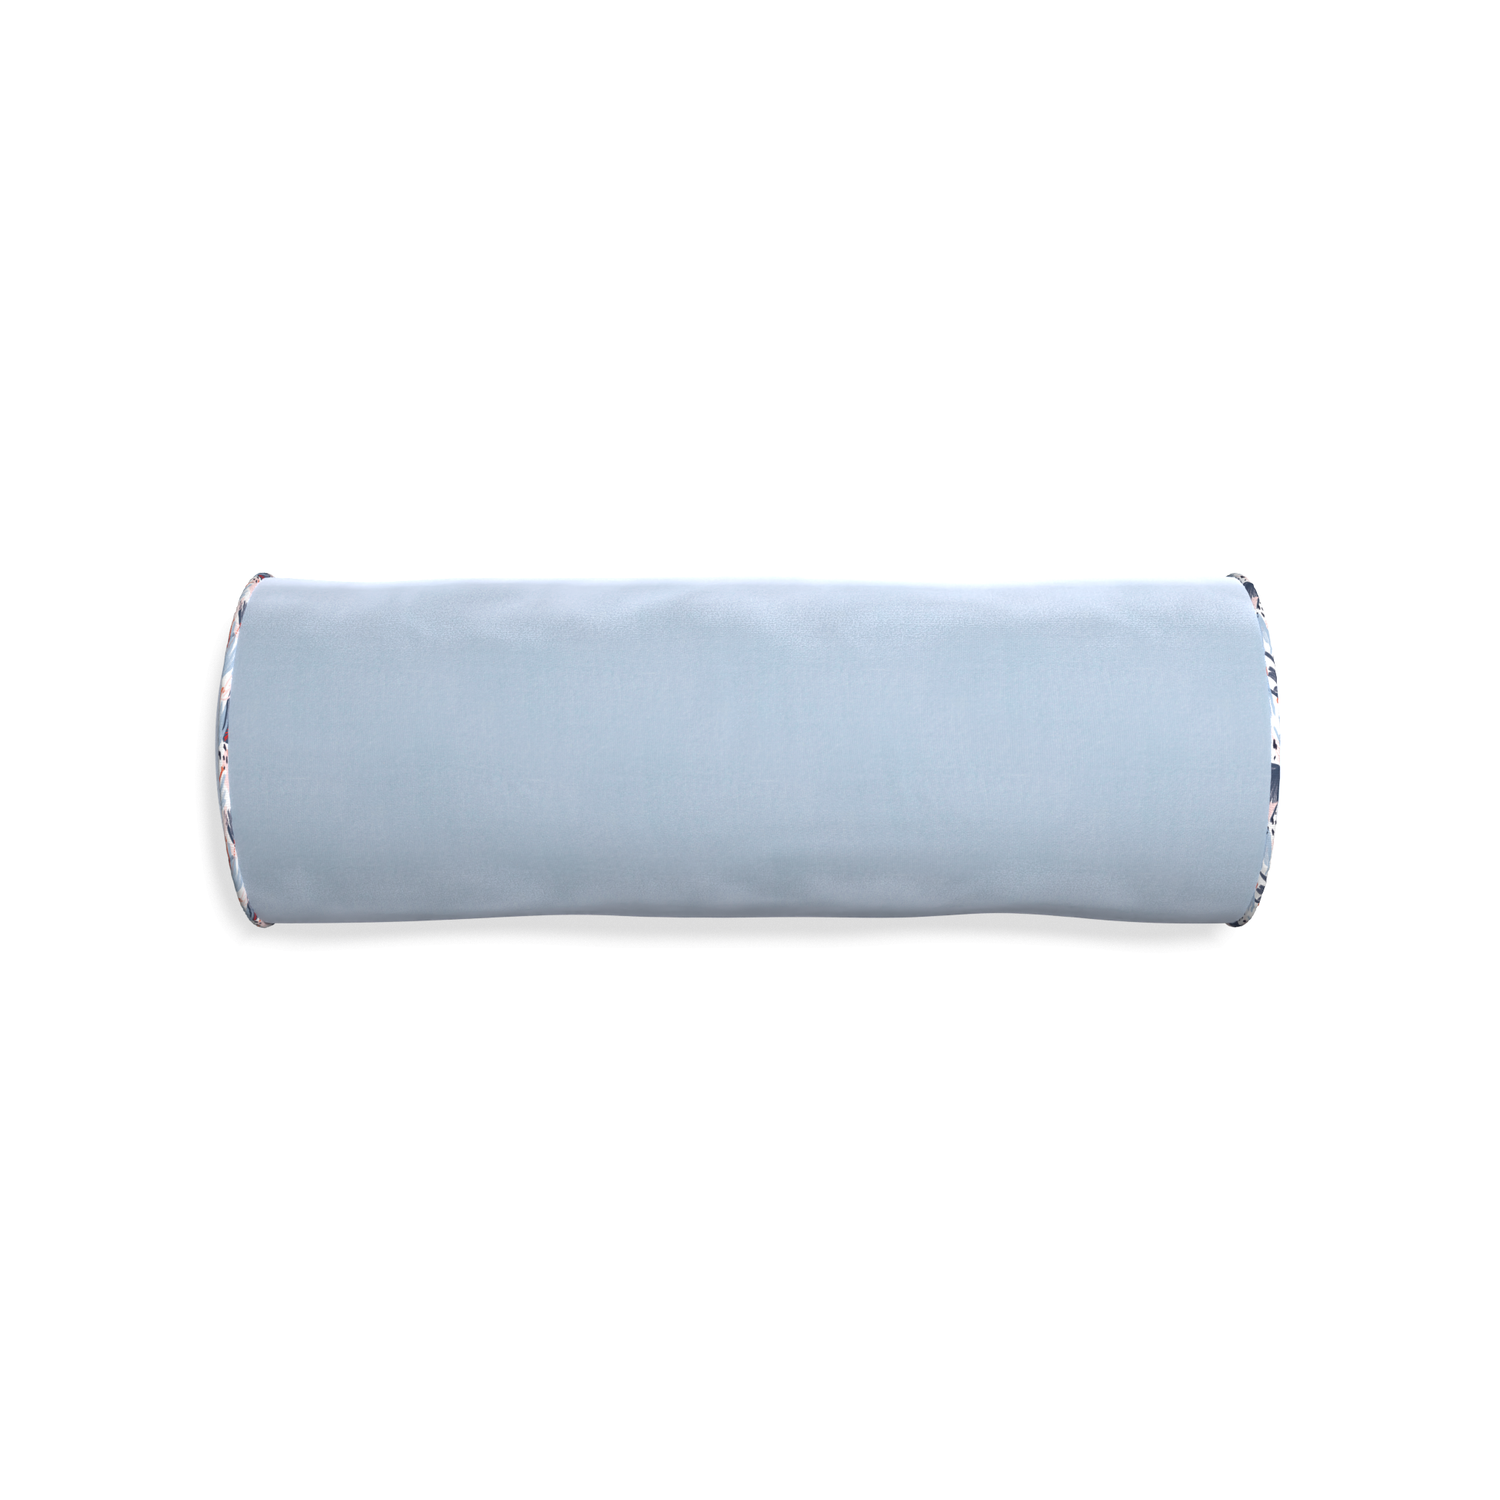 bolster light blue velvet pillow with red and blue piping